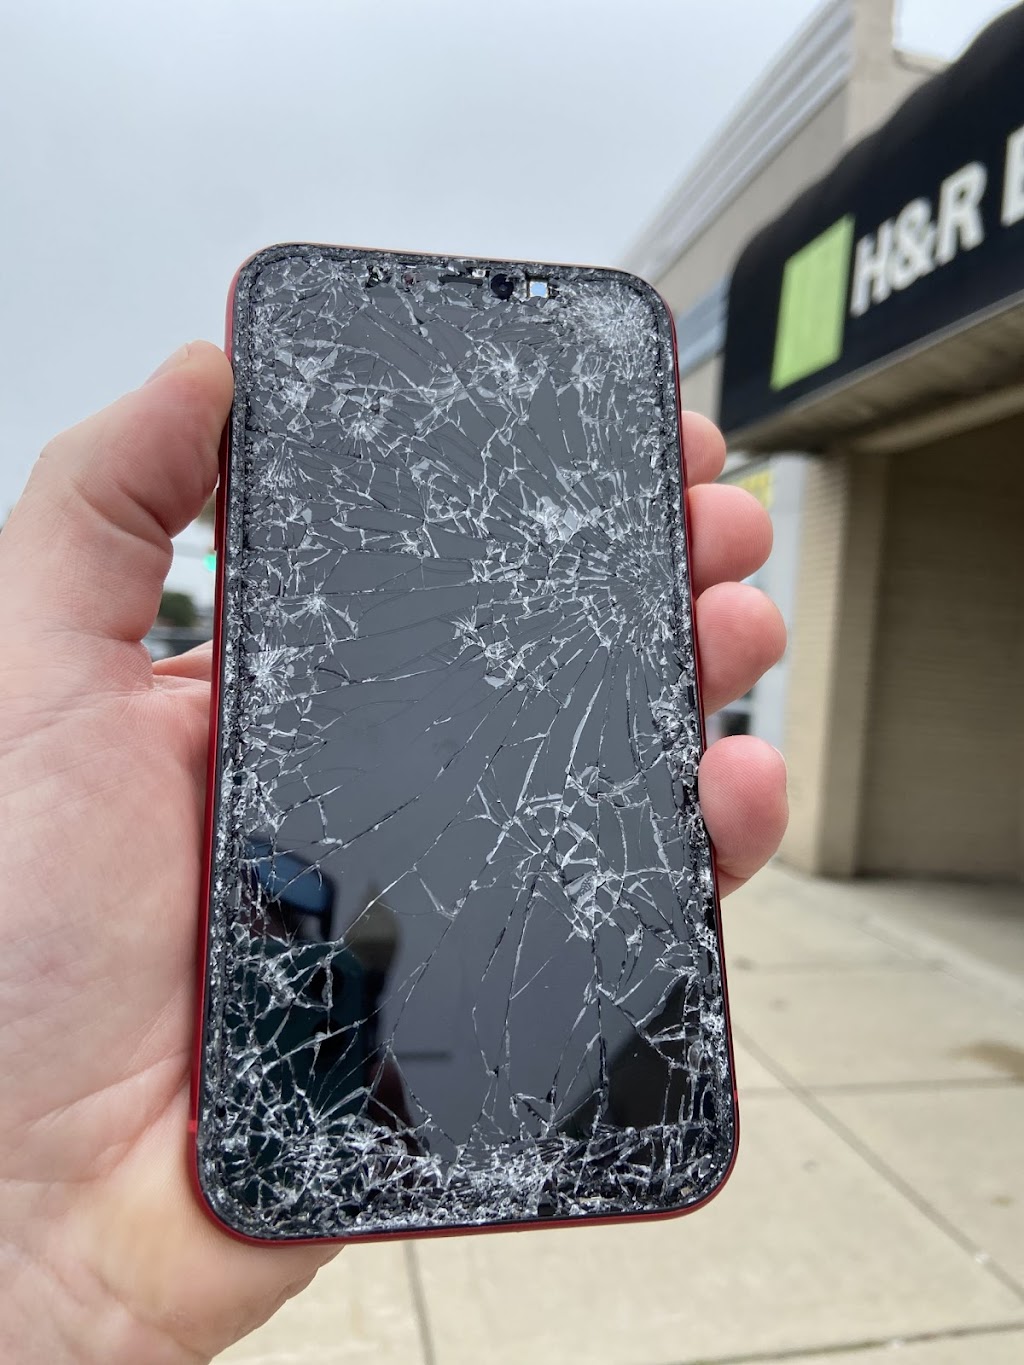 CA Mart Cellphone Repair Sales & Services | store | 825 Ontario Rd Unit 110, Welland, ON L3B 5V6, Canada | 2898205538 OR +1 289-820-5538